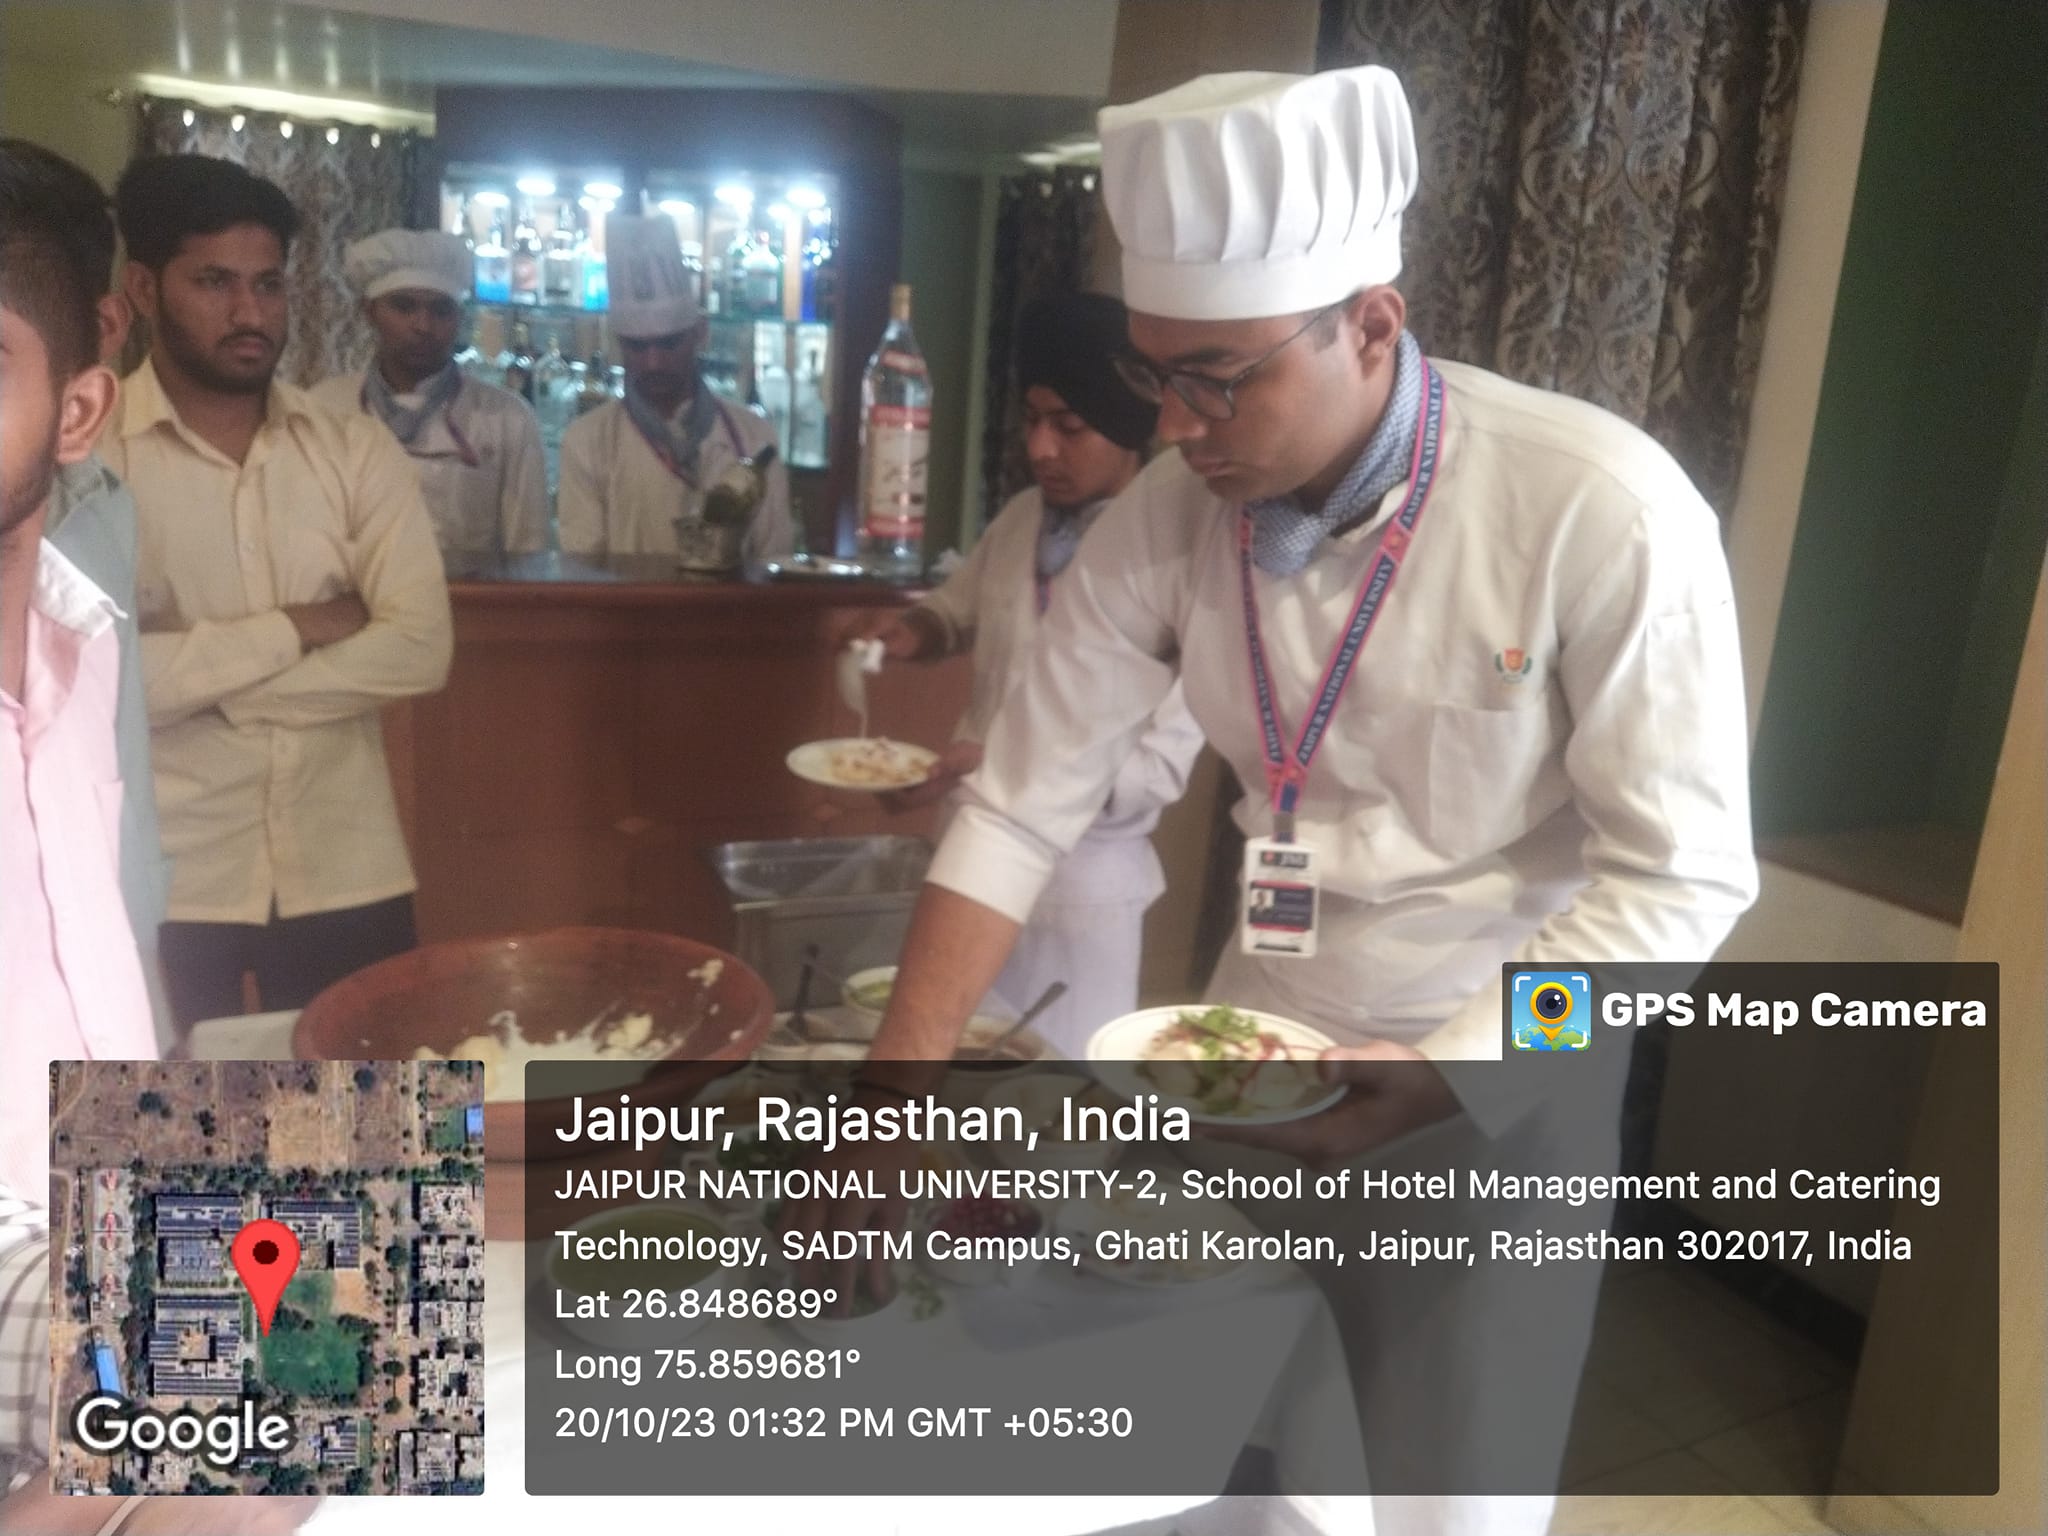 School of Hotel Management & Catering Technology